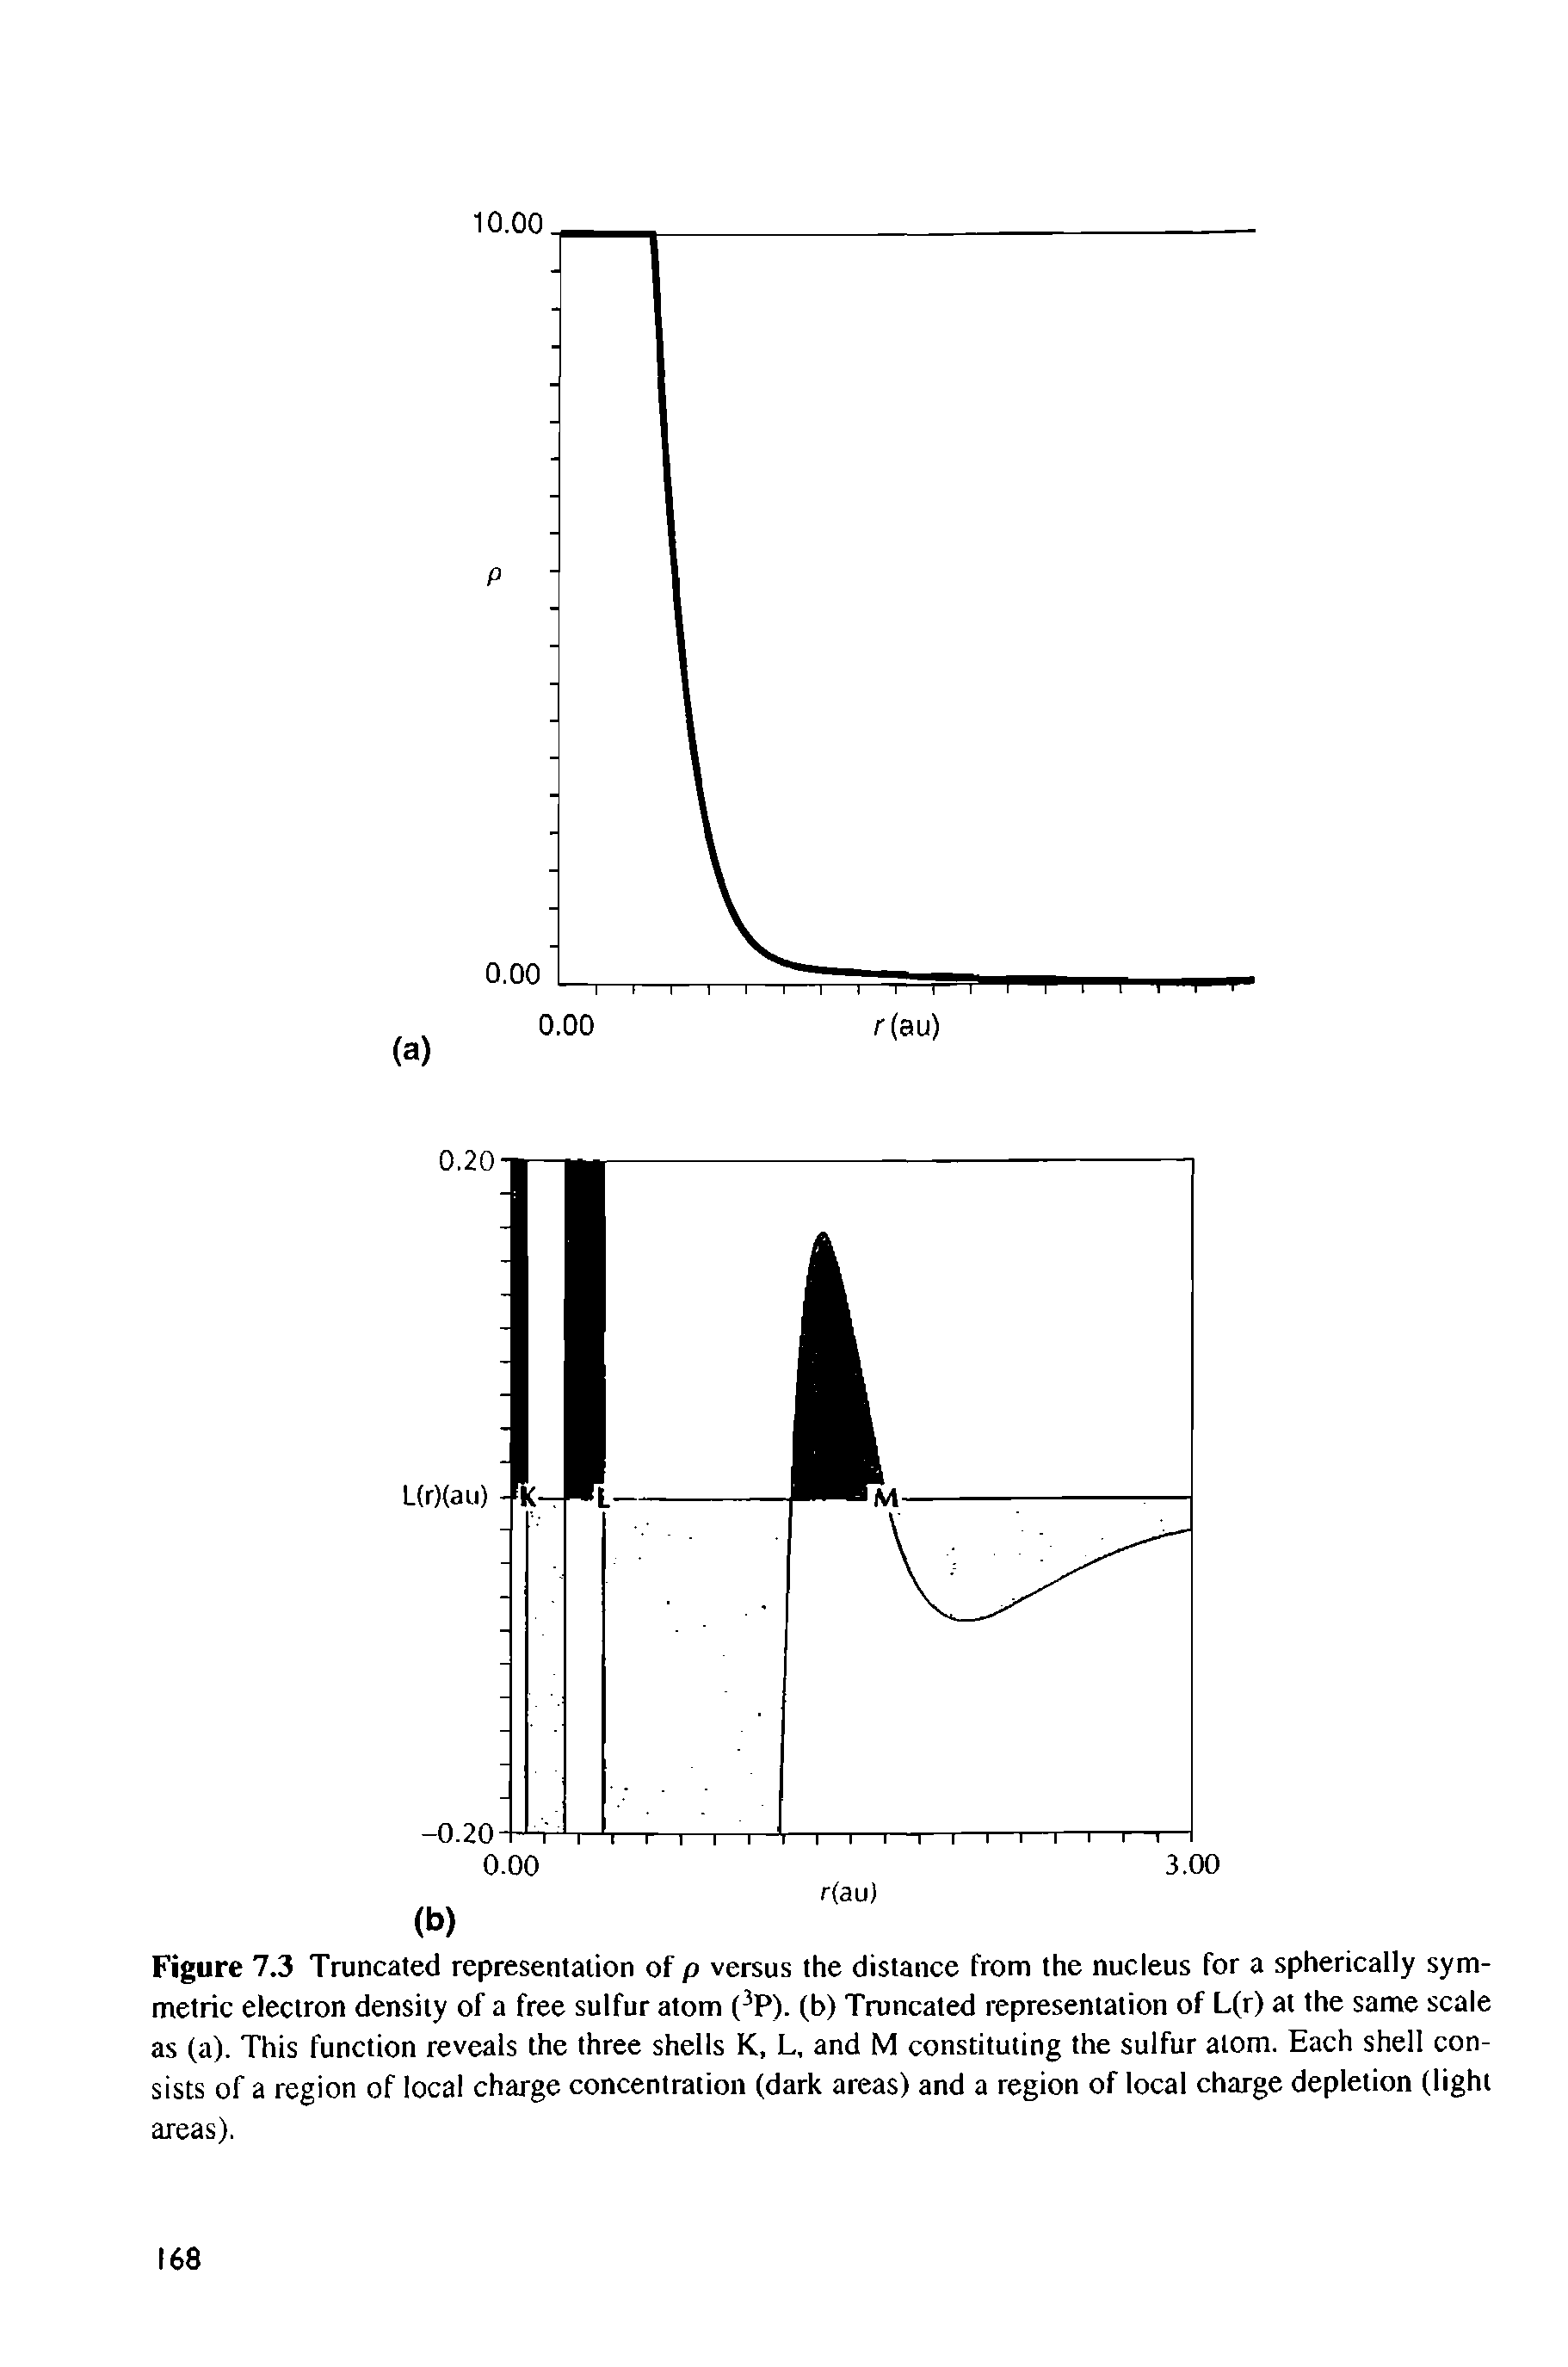 Figure 7.3 Truncated representation of p versus the distance from the nucleus for a spherically symmetric electron density of a free sulfur atom (3P). (b) Truncated representation of L(r) at the same scale as (a). This function reveals the three shells K, L, and M constituting the sulfur atom. Each shell consists of a region of local charge concentration (dark areas) and a region of local charge depletion (light...